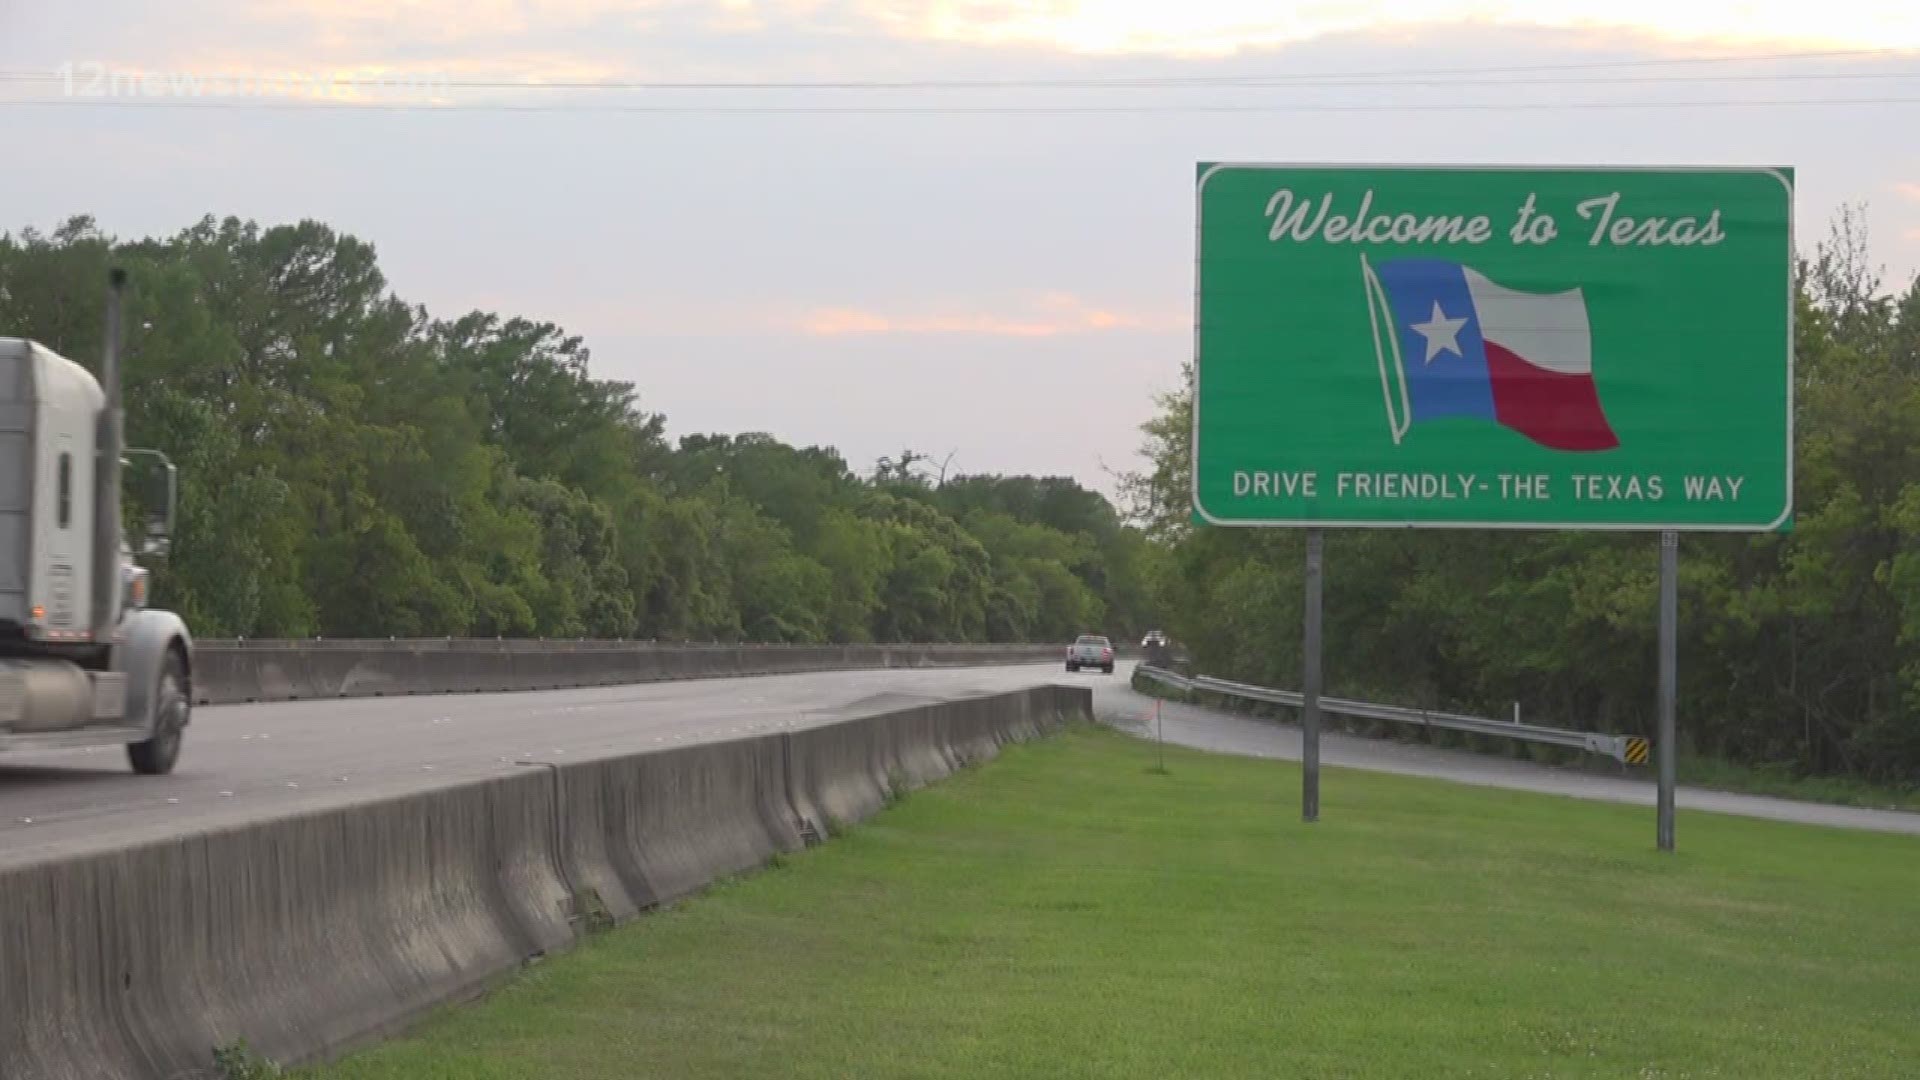 Workers who need to travel back and forth over the Texas-Louisiana border will need to get a letter from the state, according to TDEM.